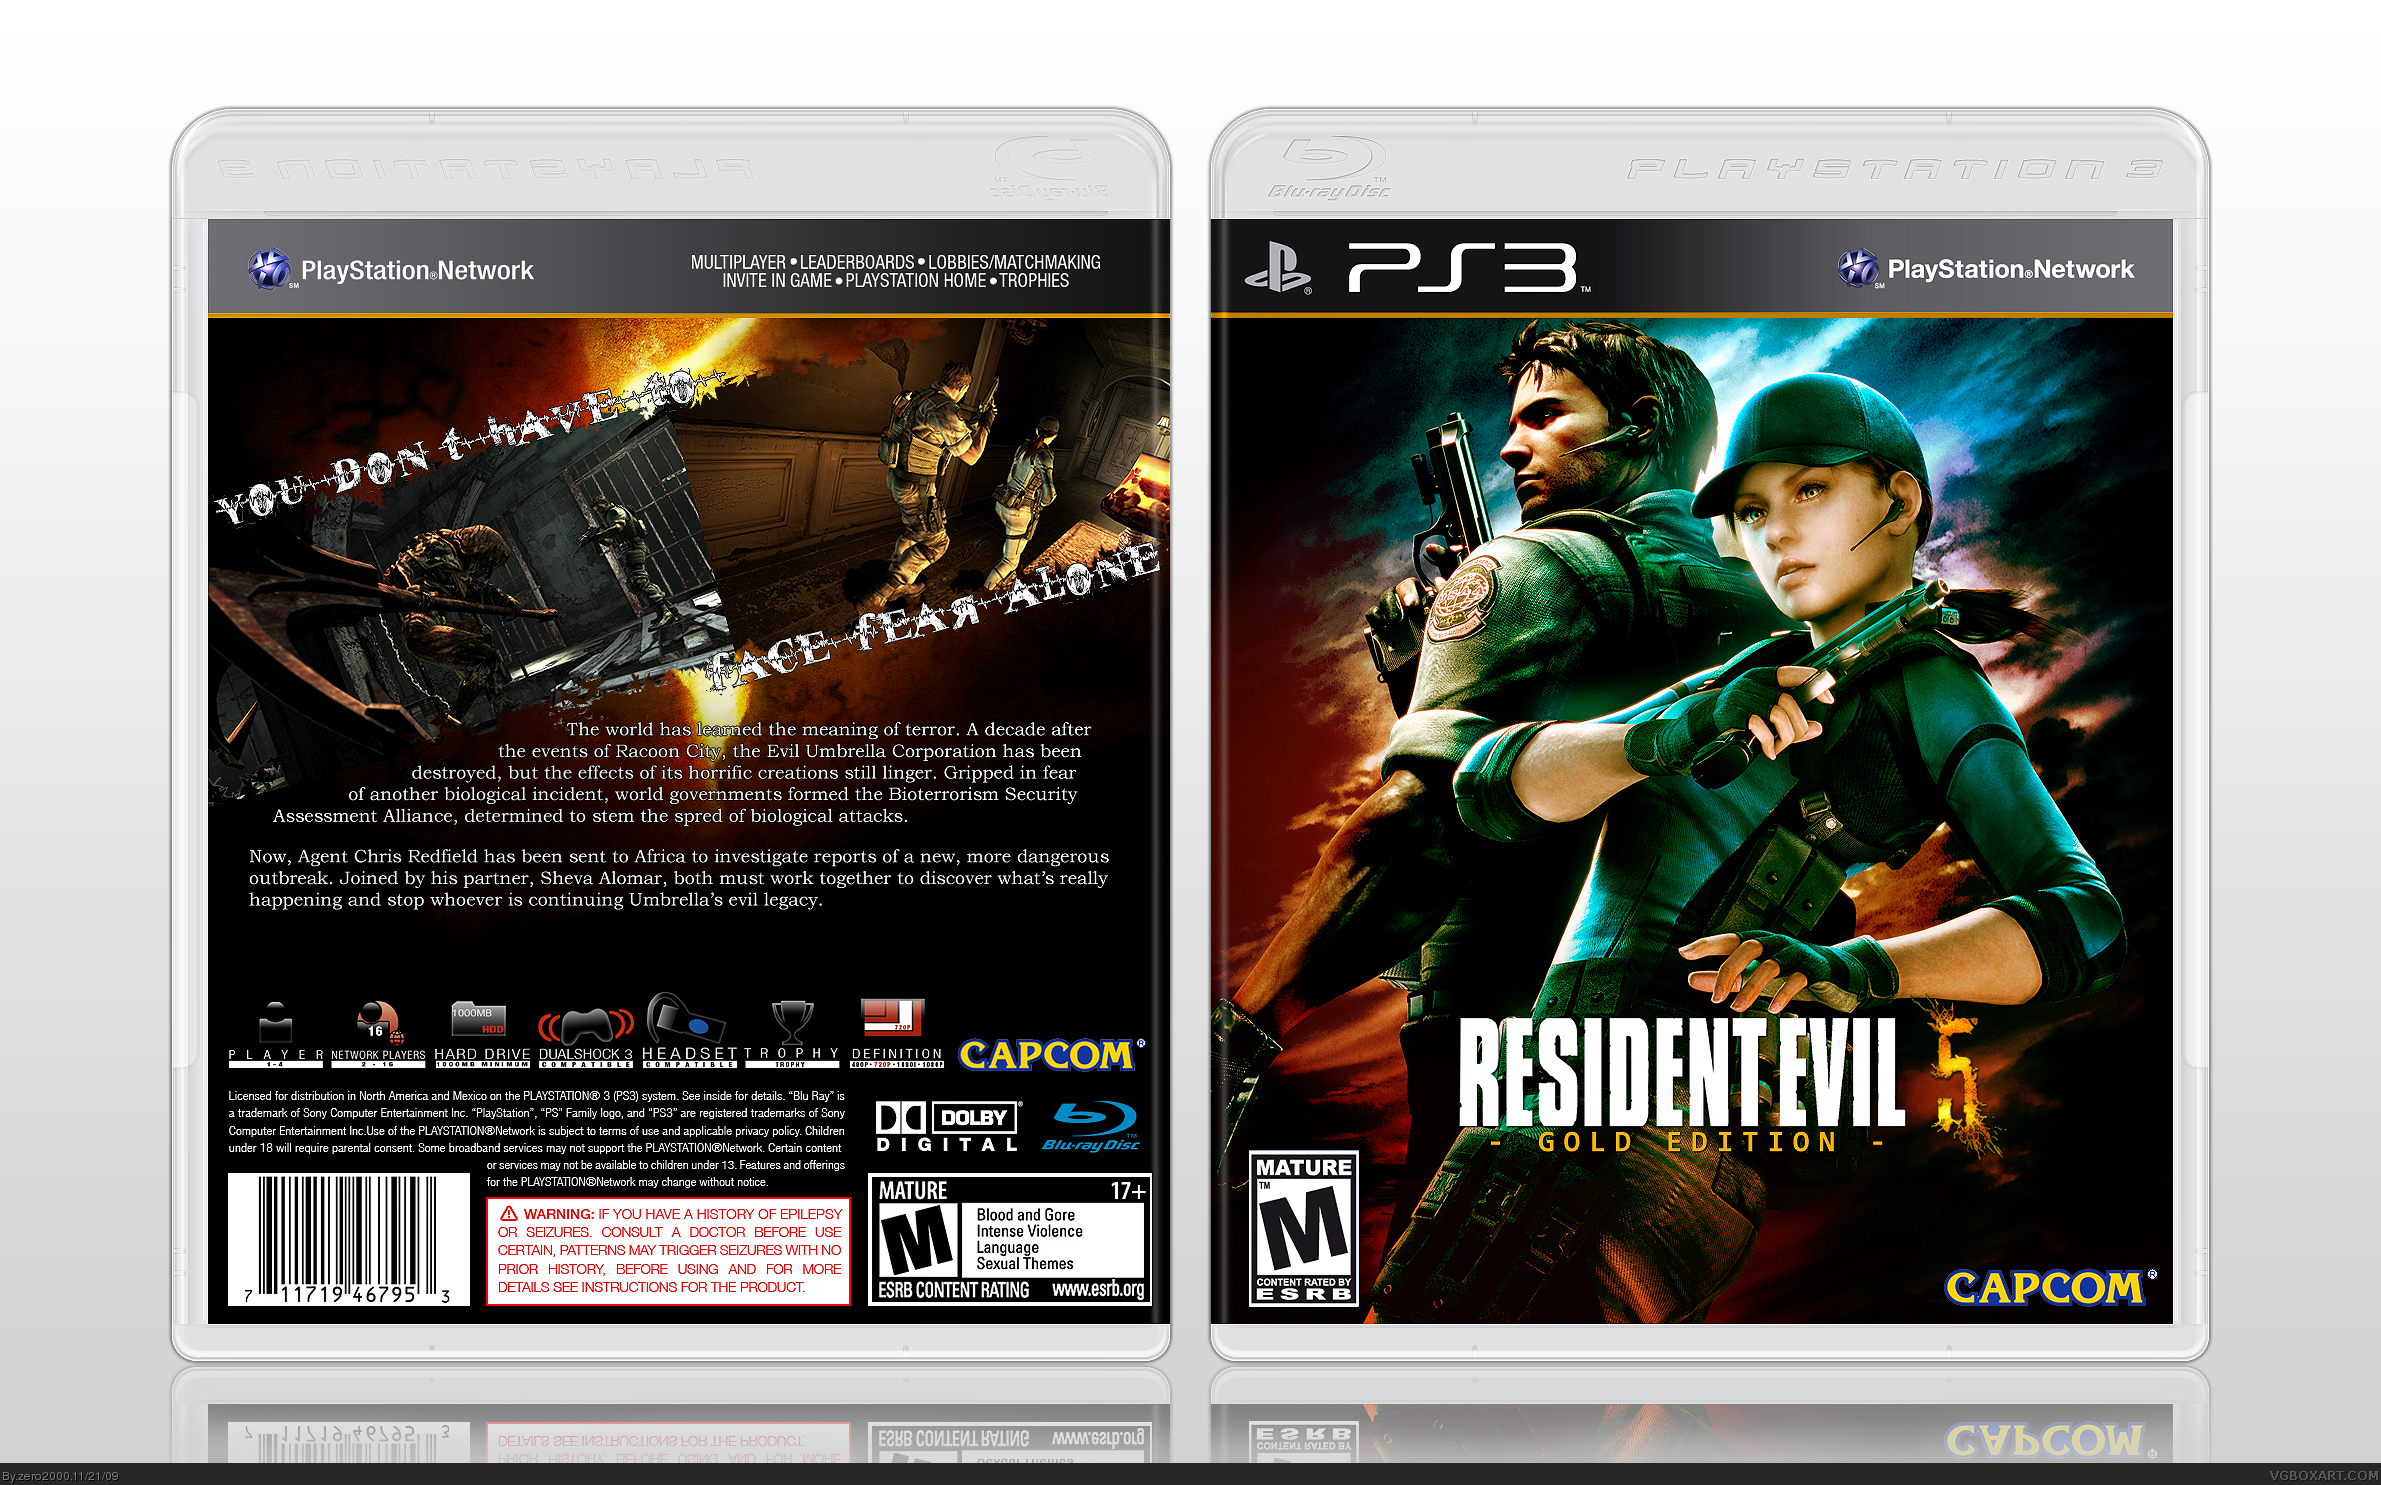 Resident Evil 5 Gold Edition box cover